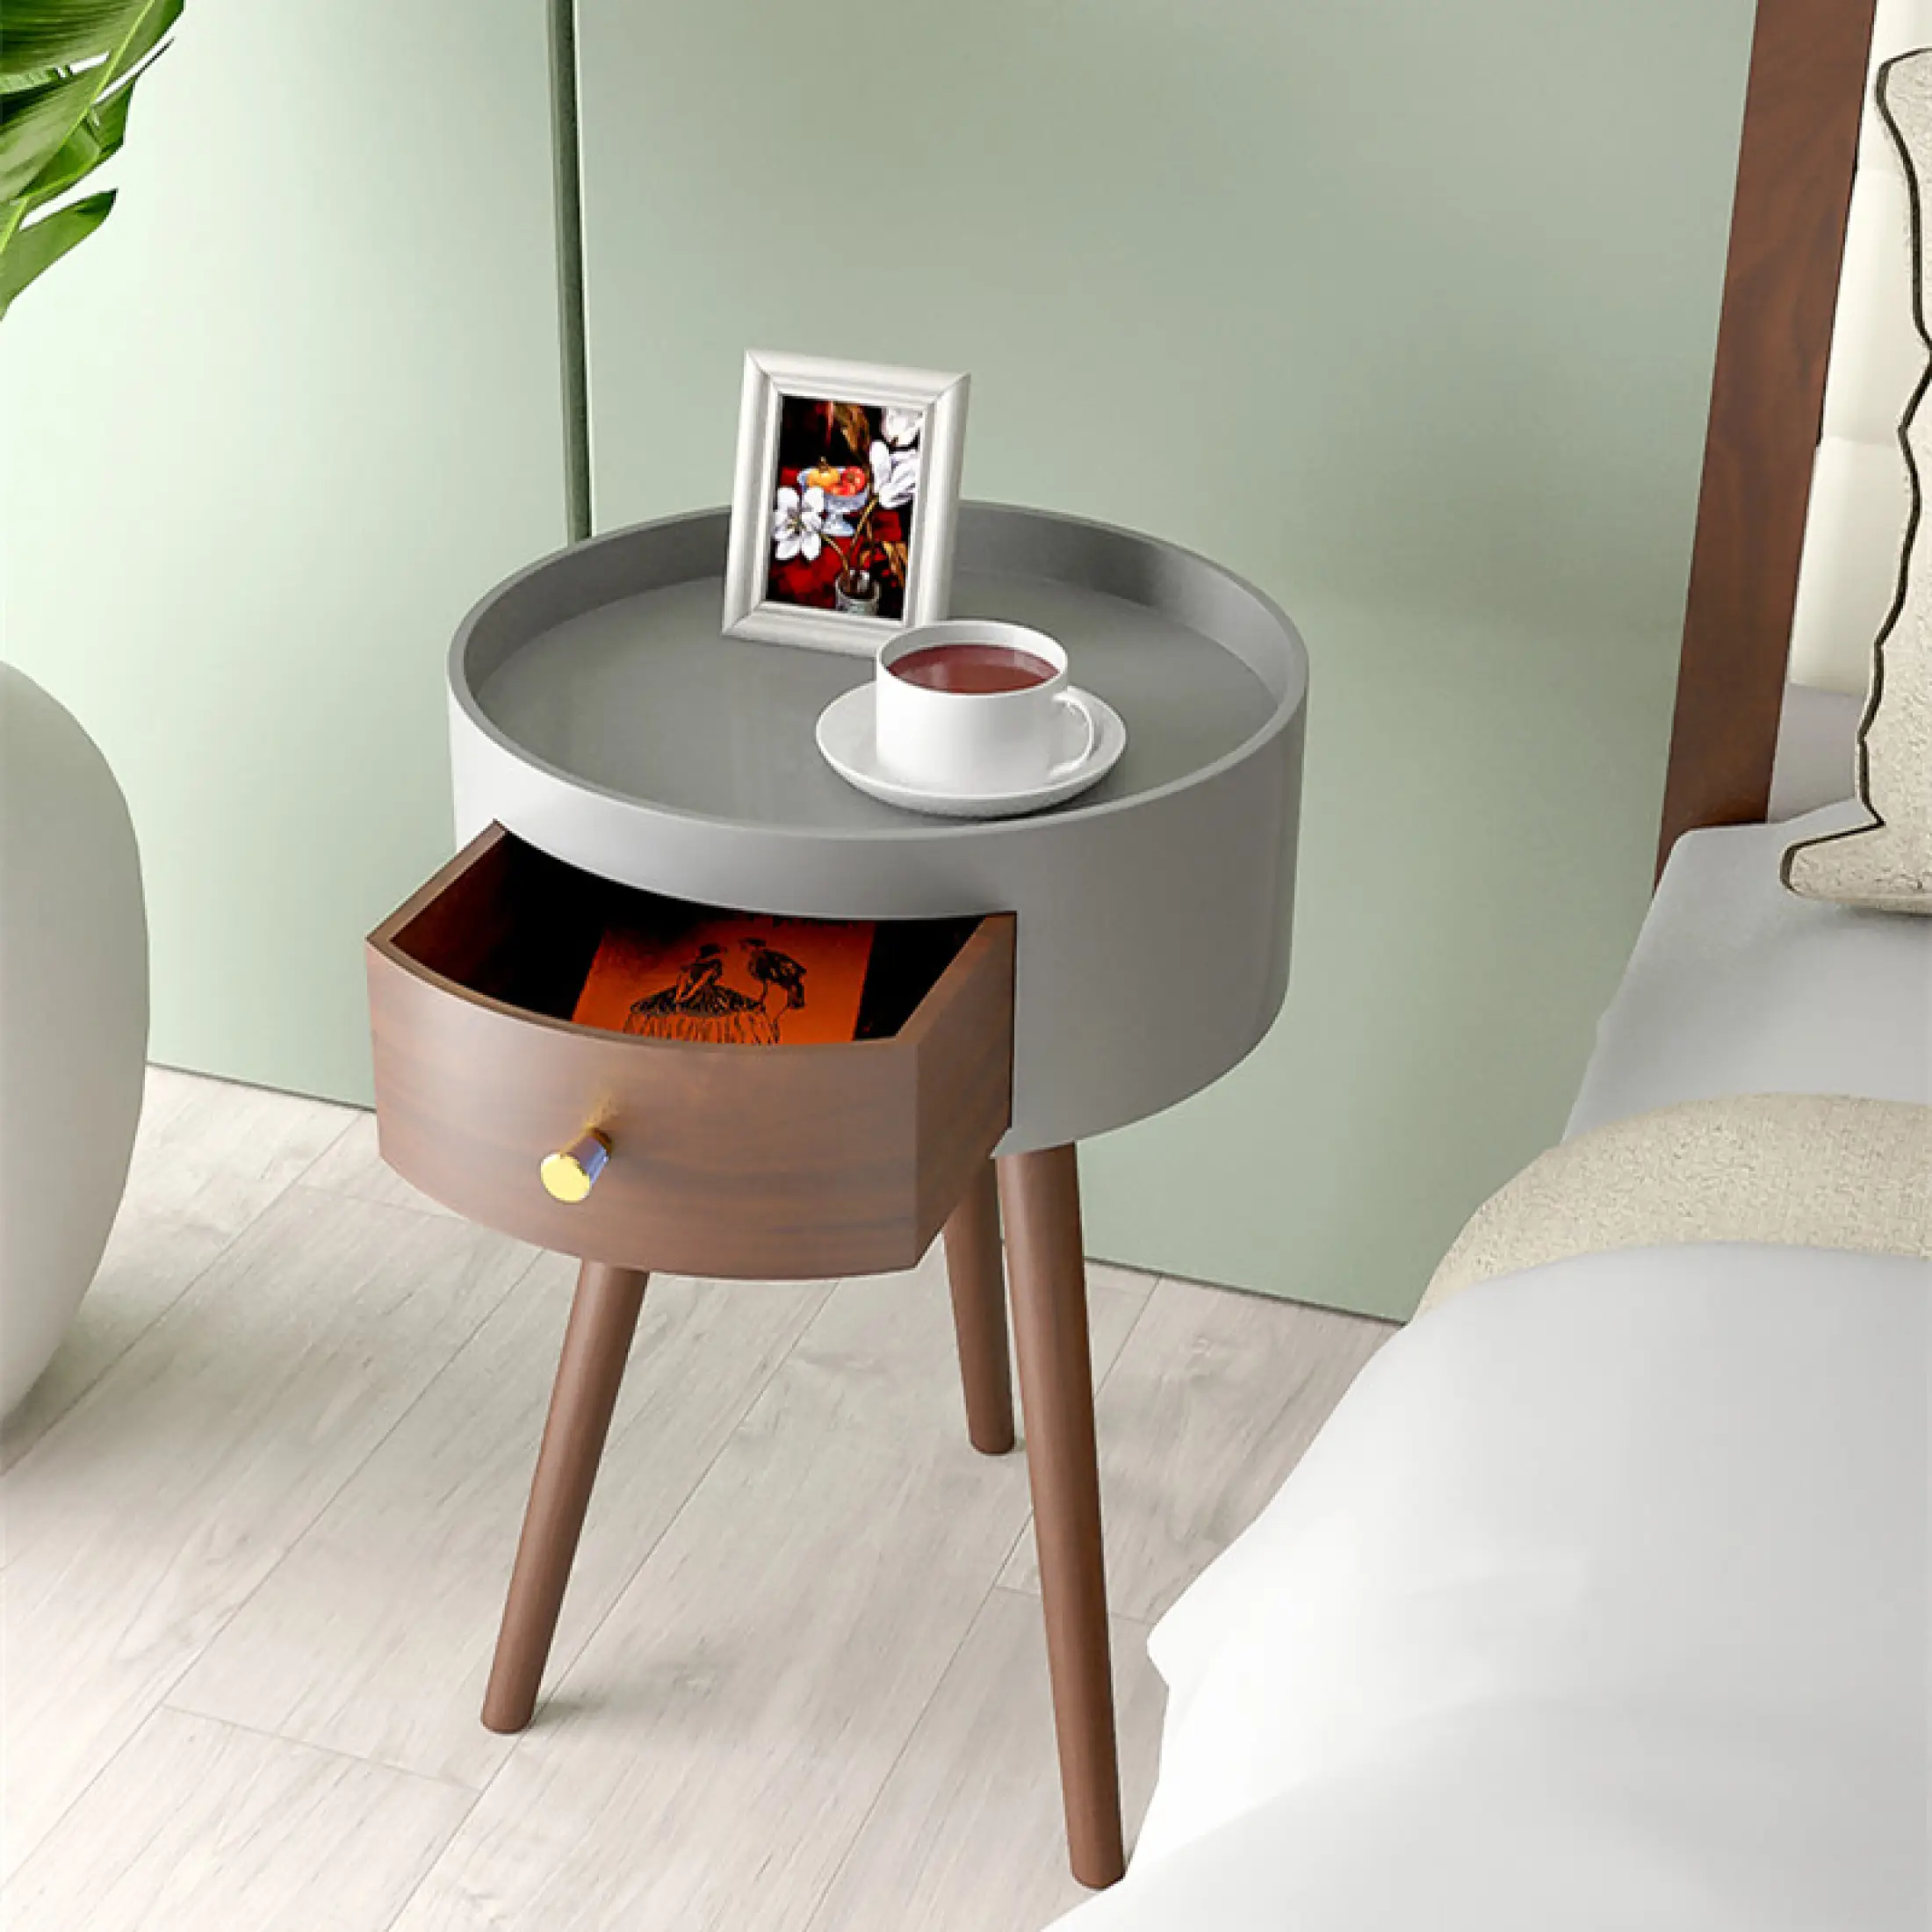 Side Tables Minimalist Small Bedroom, Small Round End Tables With Drawers